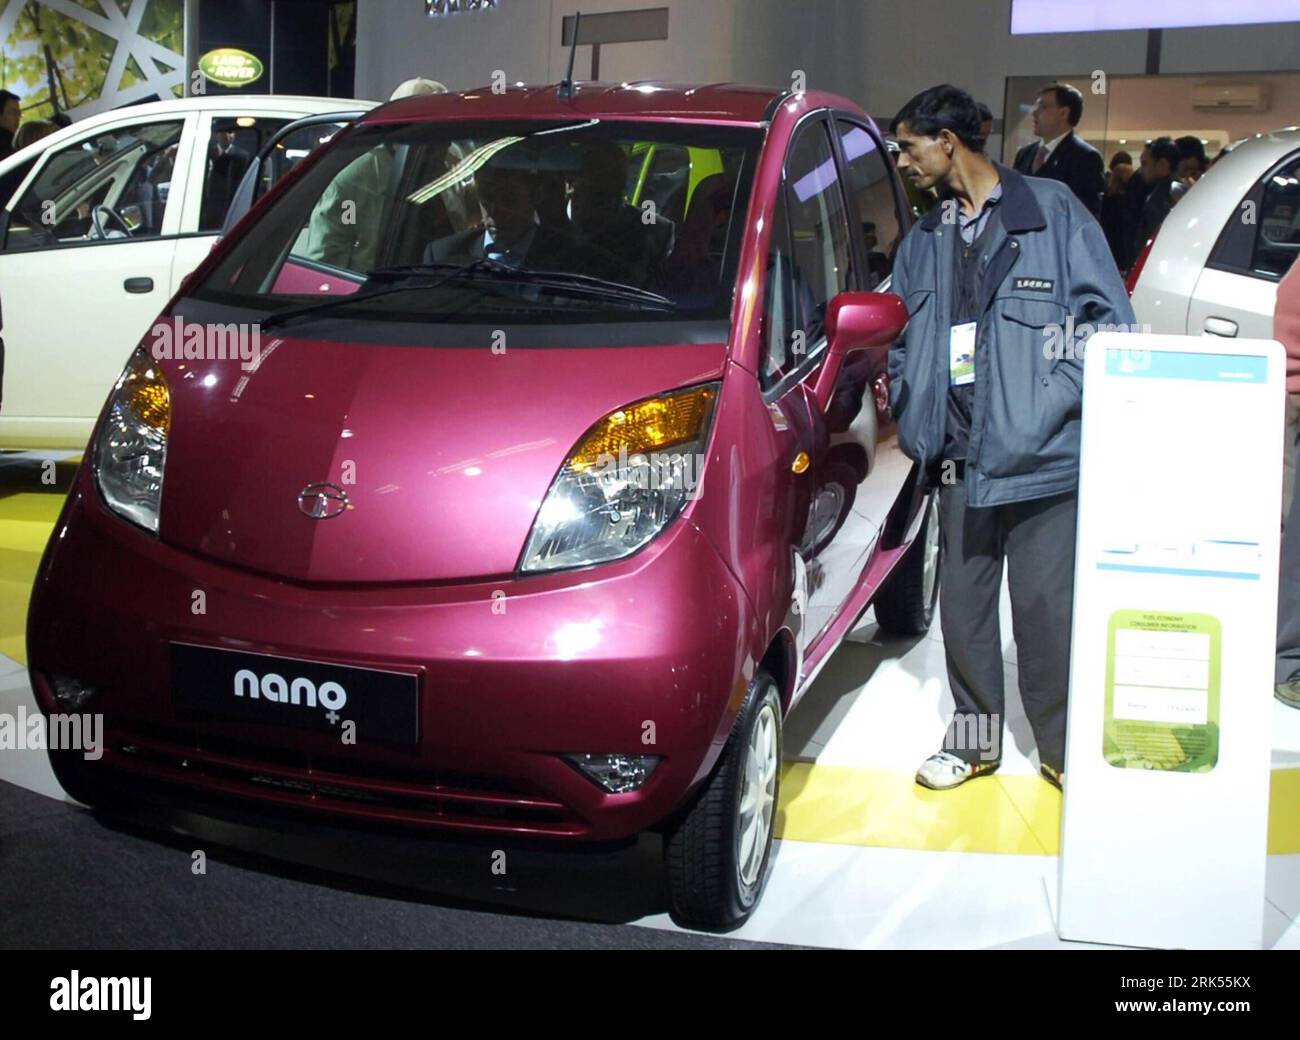 Bildnummer: 53704261  Datum: 05.01.2010  Copyright: imago/Xinhua (100105) -- NEW DELHI, Jan. 5, 2010 (Xinhua) -- A man looks at Tata Motor s cheapest car Nano at Pragati Maiden during the 10th India Auto Expo in New Delhi, capital of India, Jan. 5, 2010. The seven-day event, with more than 2,100 manufacturers participate, is expected to attract more than 1.8 million visitors since its opening on Tuesday. (Xinhua/Partha Sarkar) (zhs) (1)INDIA-NEW DEHLI-AUTO EXPO PUBLICATIONxNOTxINxCHN Messe Automesse Automobilindustrie Wirtschaft kbdig xsk 2010 quer o0 Auto o00 Objekte    Bildnummer 53704261 Da Stock Photo